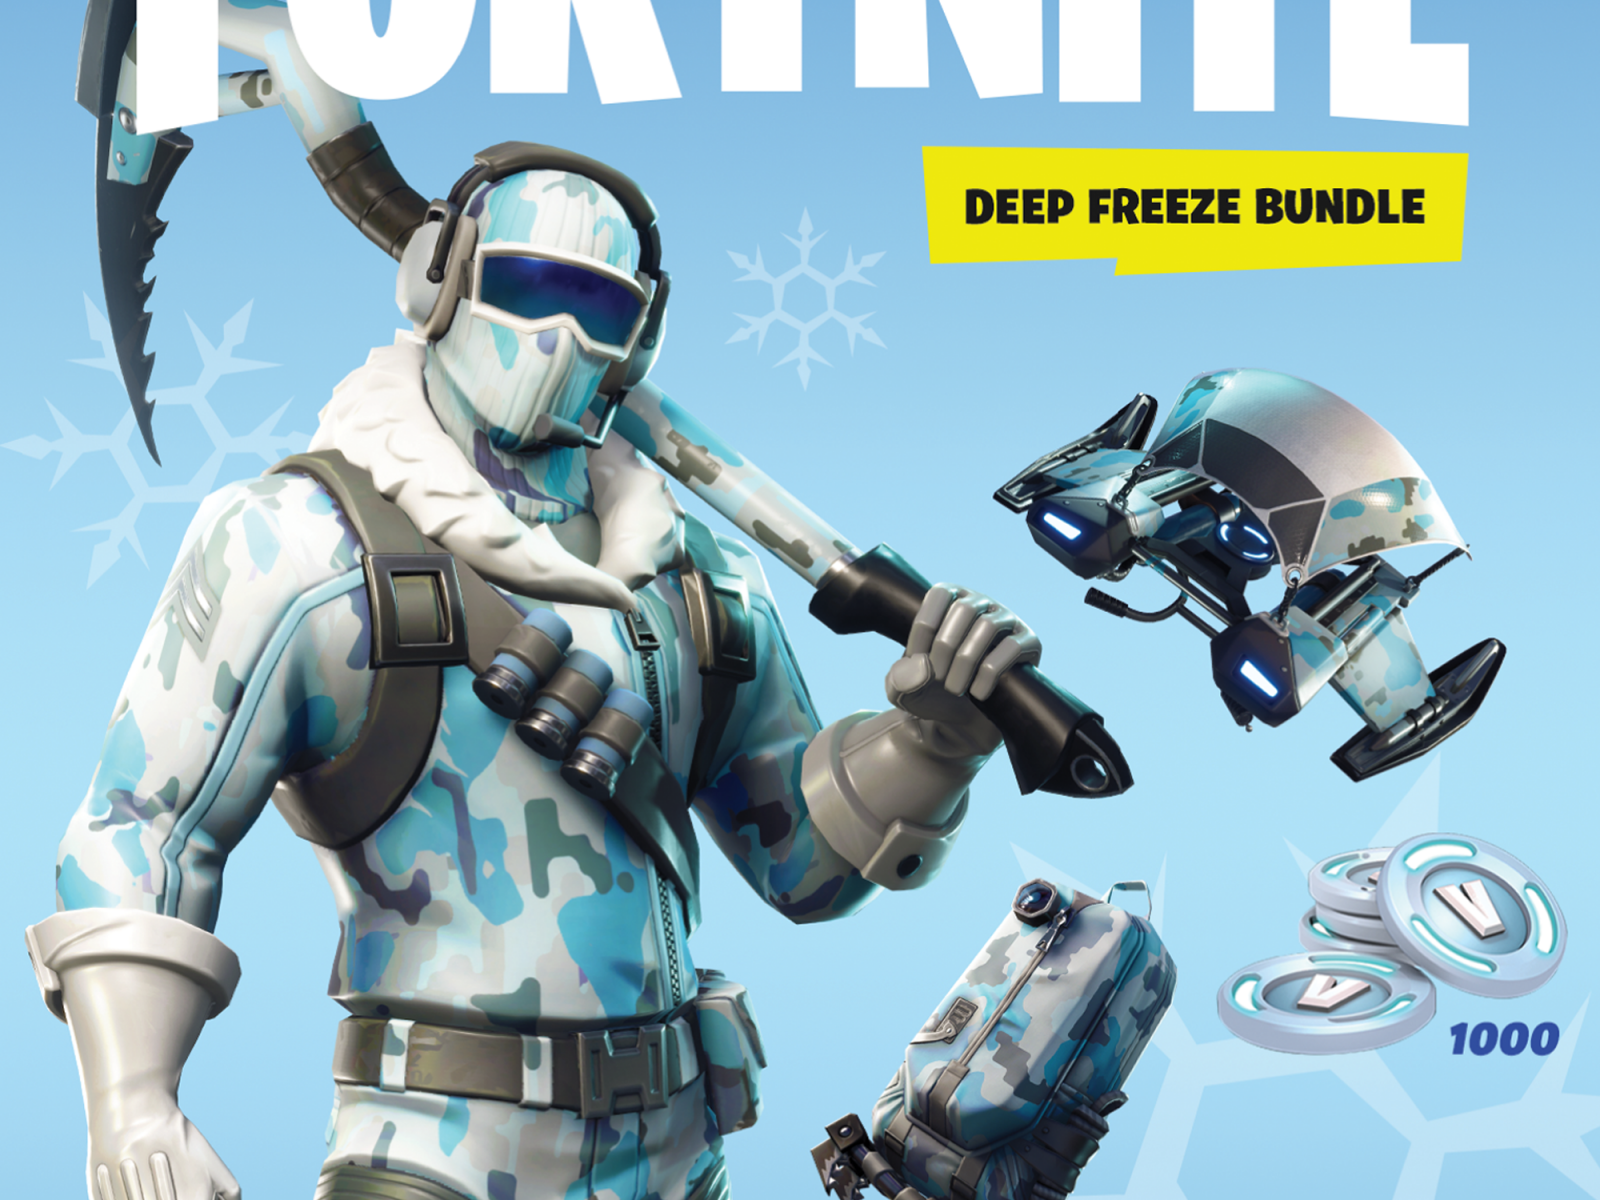 Fortnite Frostbites Locations Fortnite Deep Freeze Bundle Coming To Ps4 Xbox Switch With Frostbite Skin